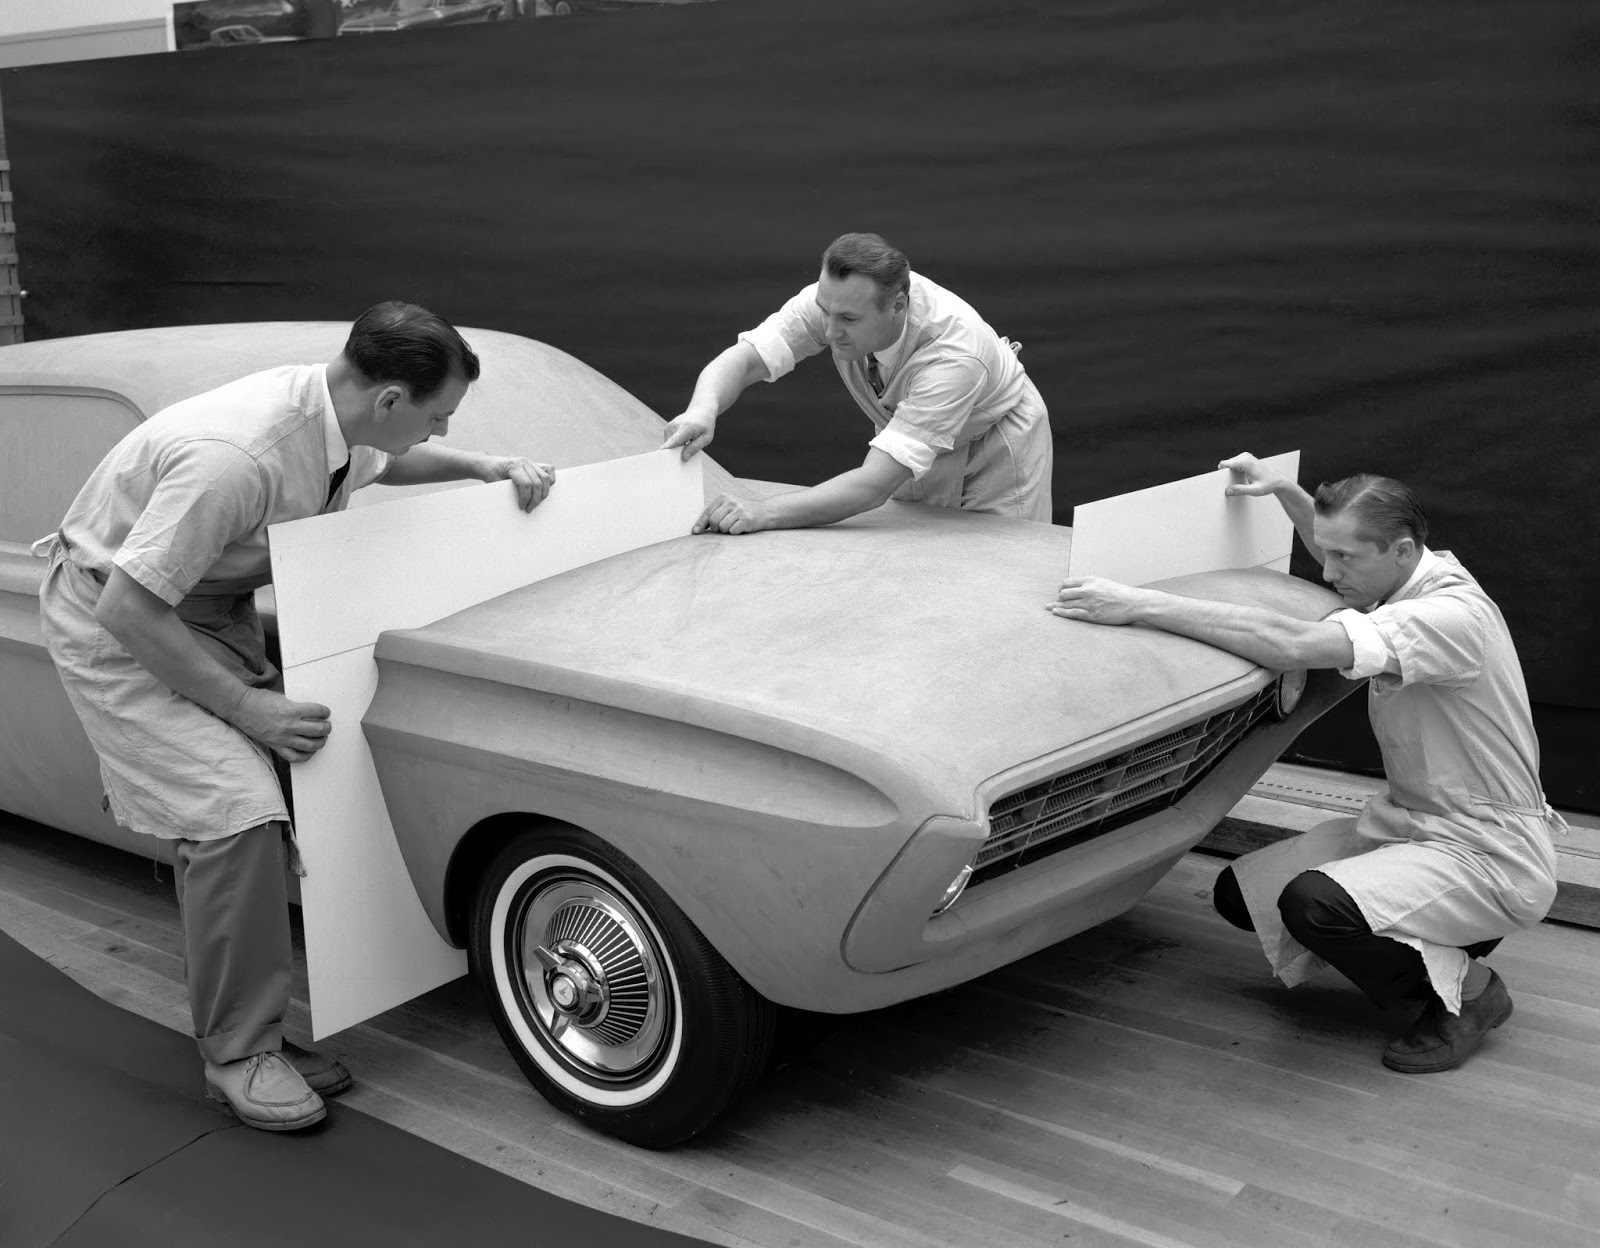 Q1 Special Falcon 1962 Ford Styling Center clay modeling 1 Πώς γιορτάζει η Mustang τα 55 της χρόνια;